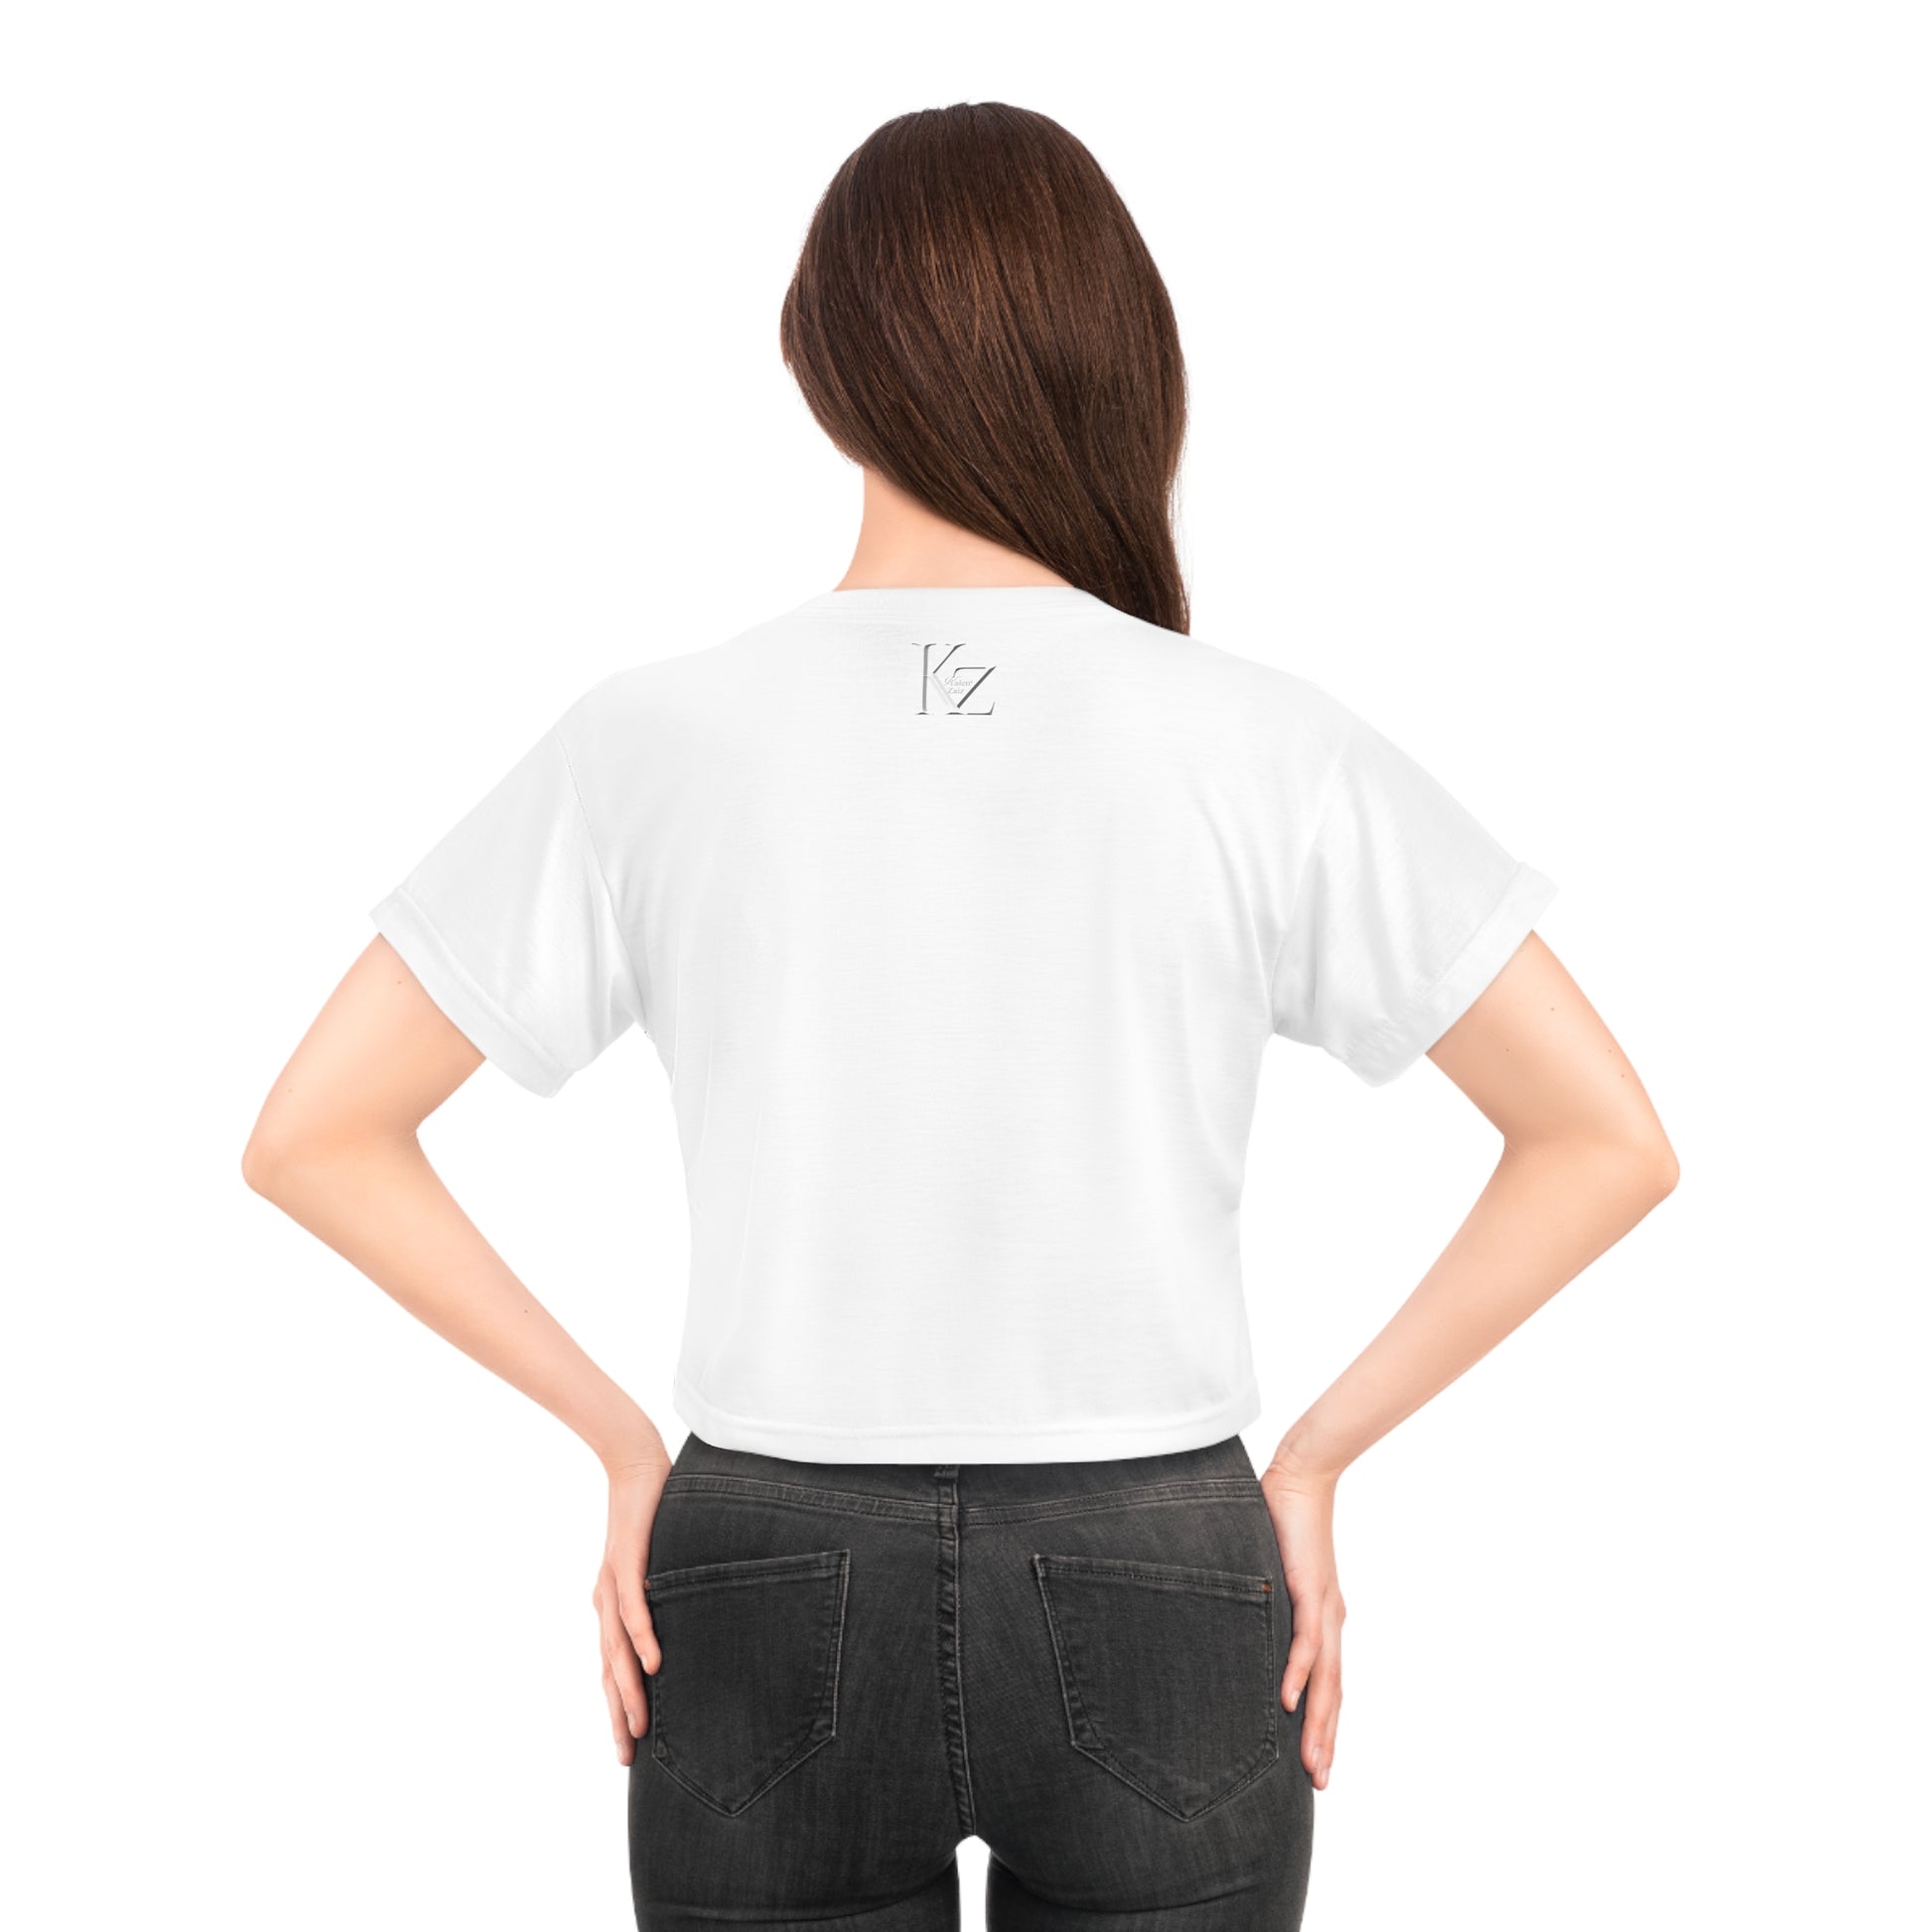 This personalized crop top has both comfort and style in spades. Add whimsical patterns, feel-good designs and create a unique AOP crop tee that’s perfect for everyday wear. Made 100% with silky soft polyester that is both lightweight and breath